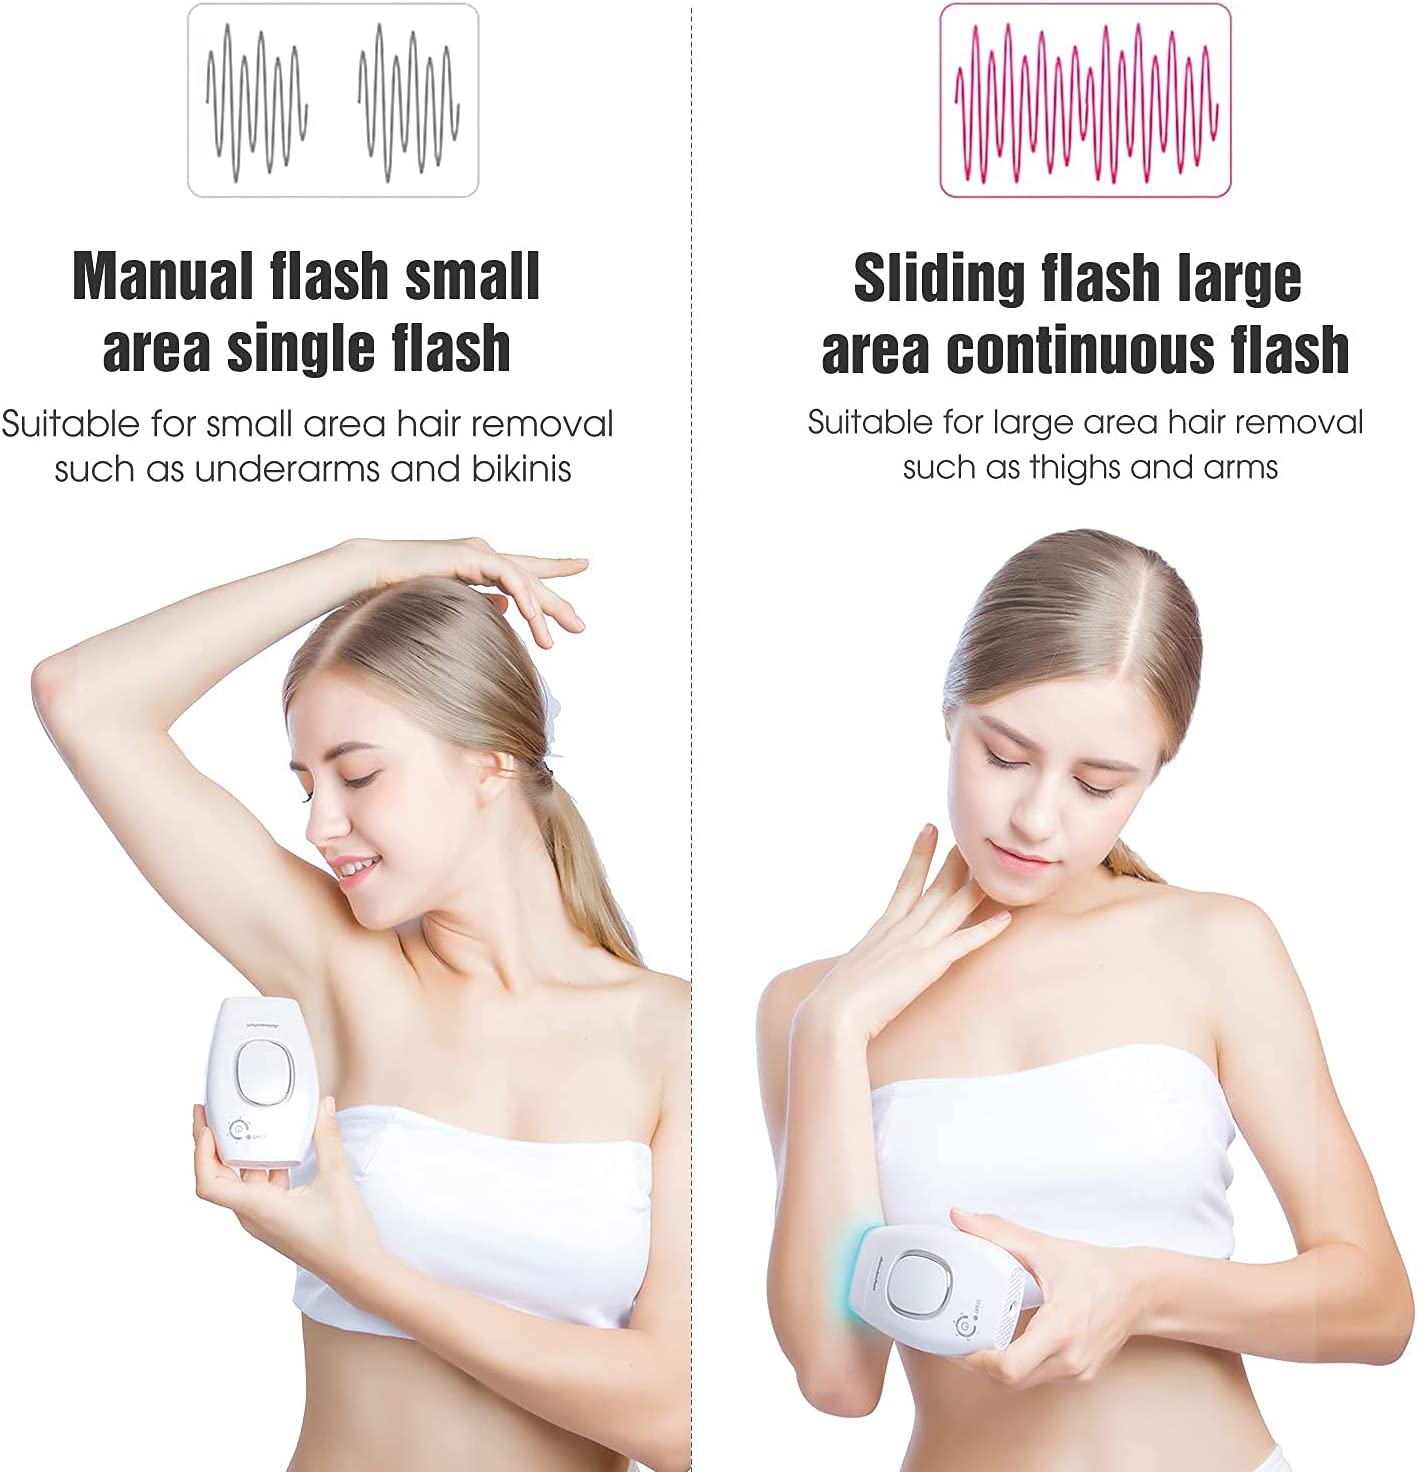 IPL Hair Removal for Women & Men at Home Use Permanent Reduction in Hair Regrowth Painless Hair Remover Device FDA Cleared for Armpit Facial Lip Bikini Whole Body Corded Functionality